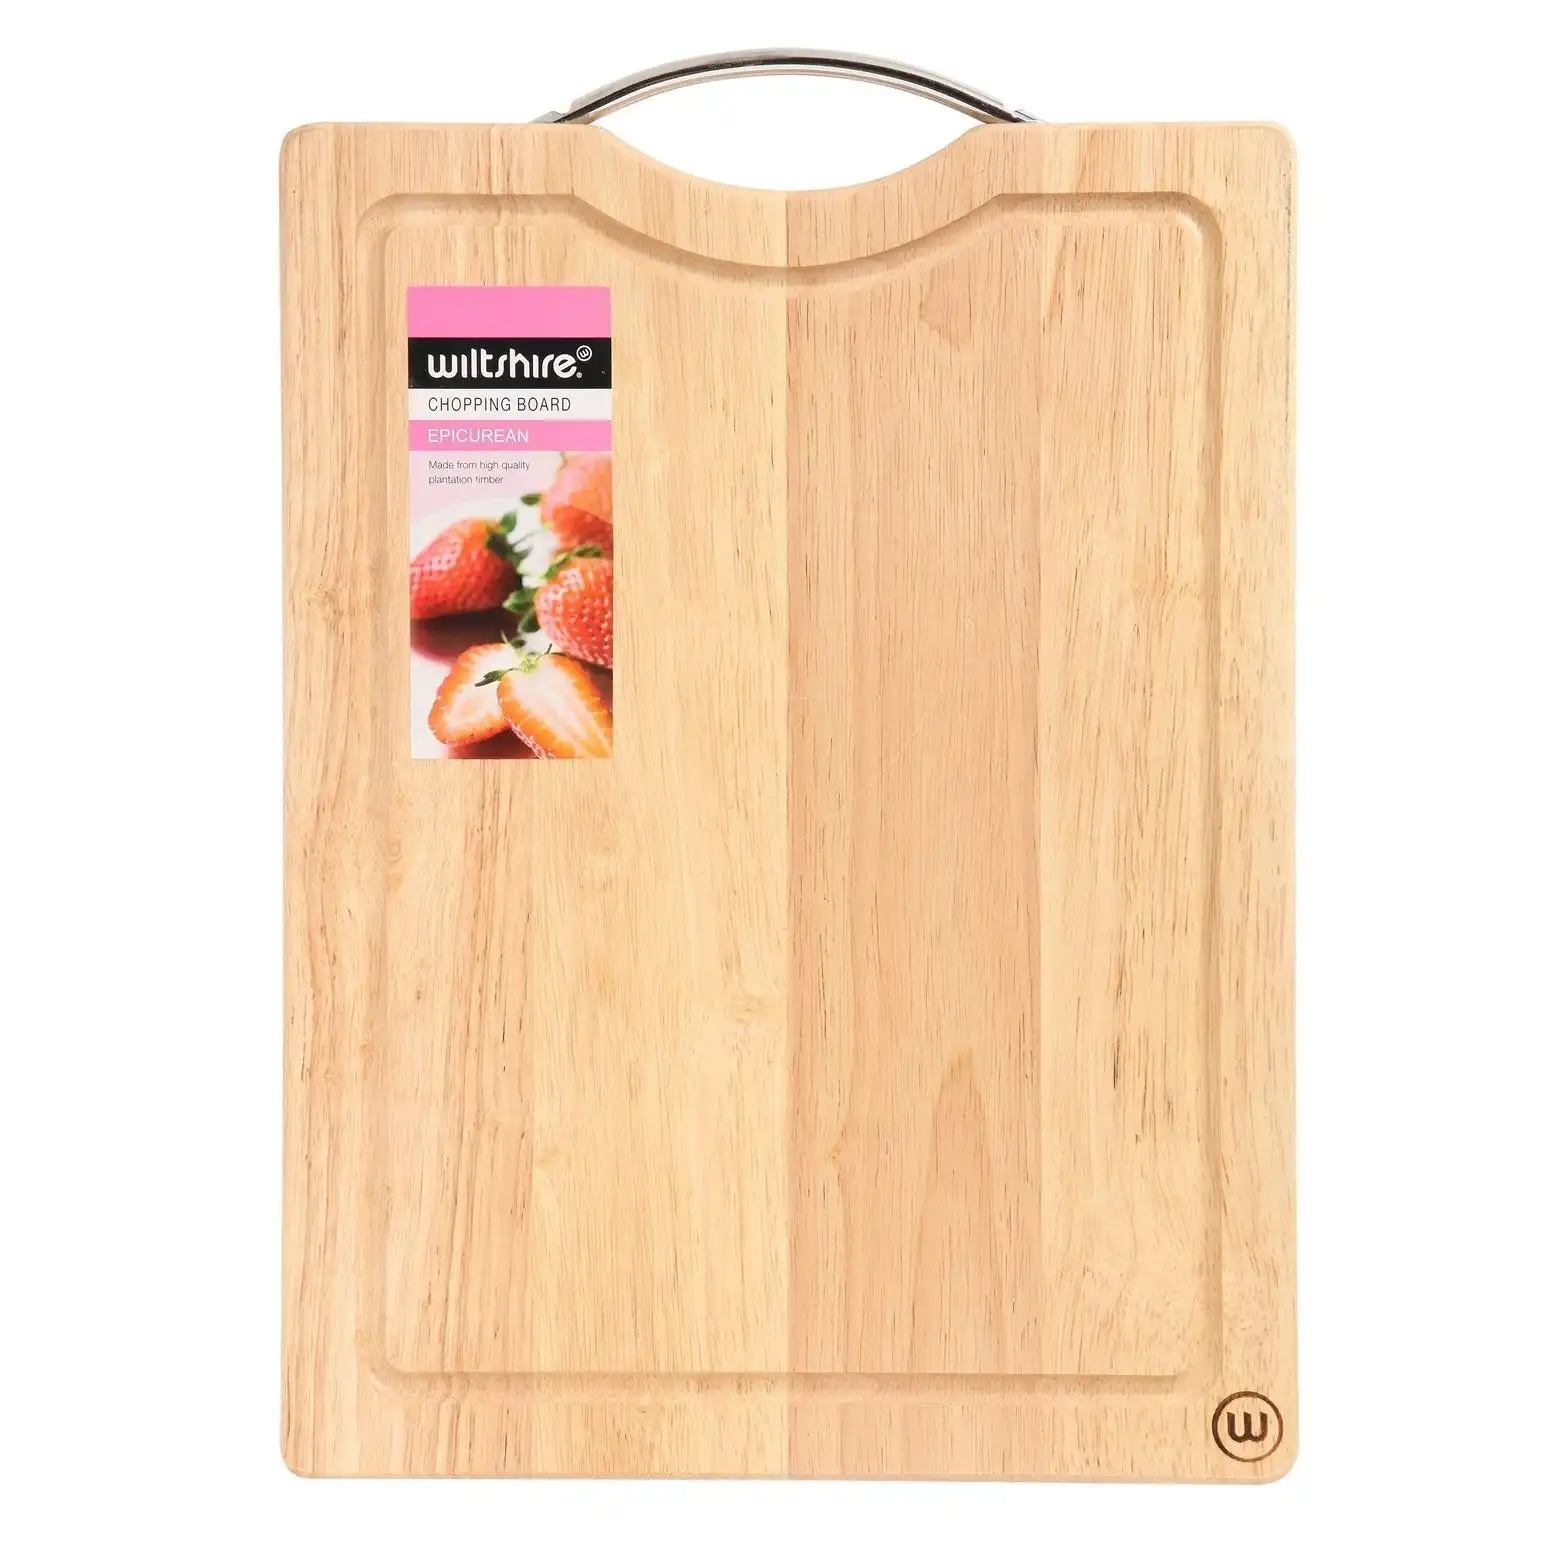 Wiltshire Epicurean Chopping Board   Large